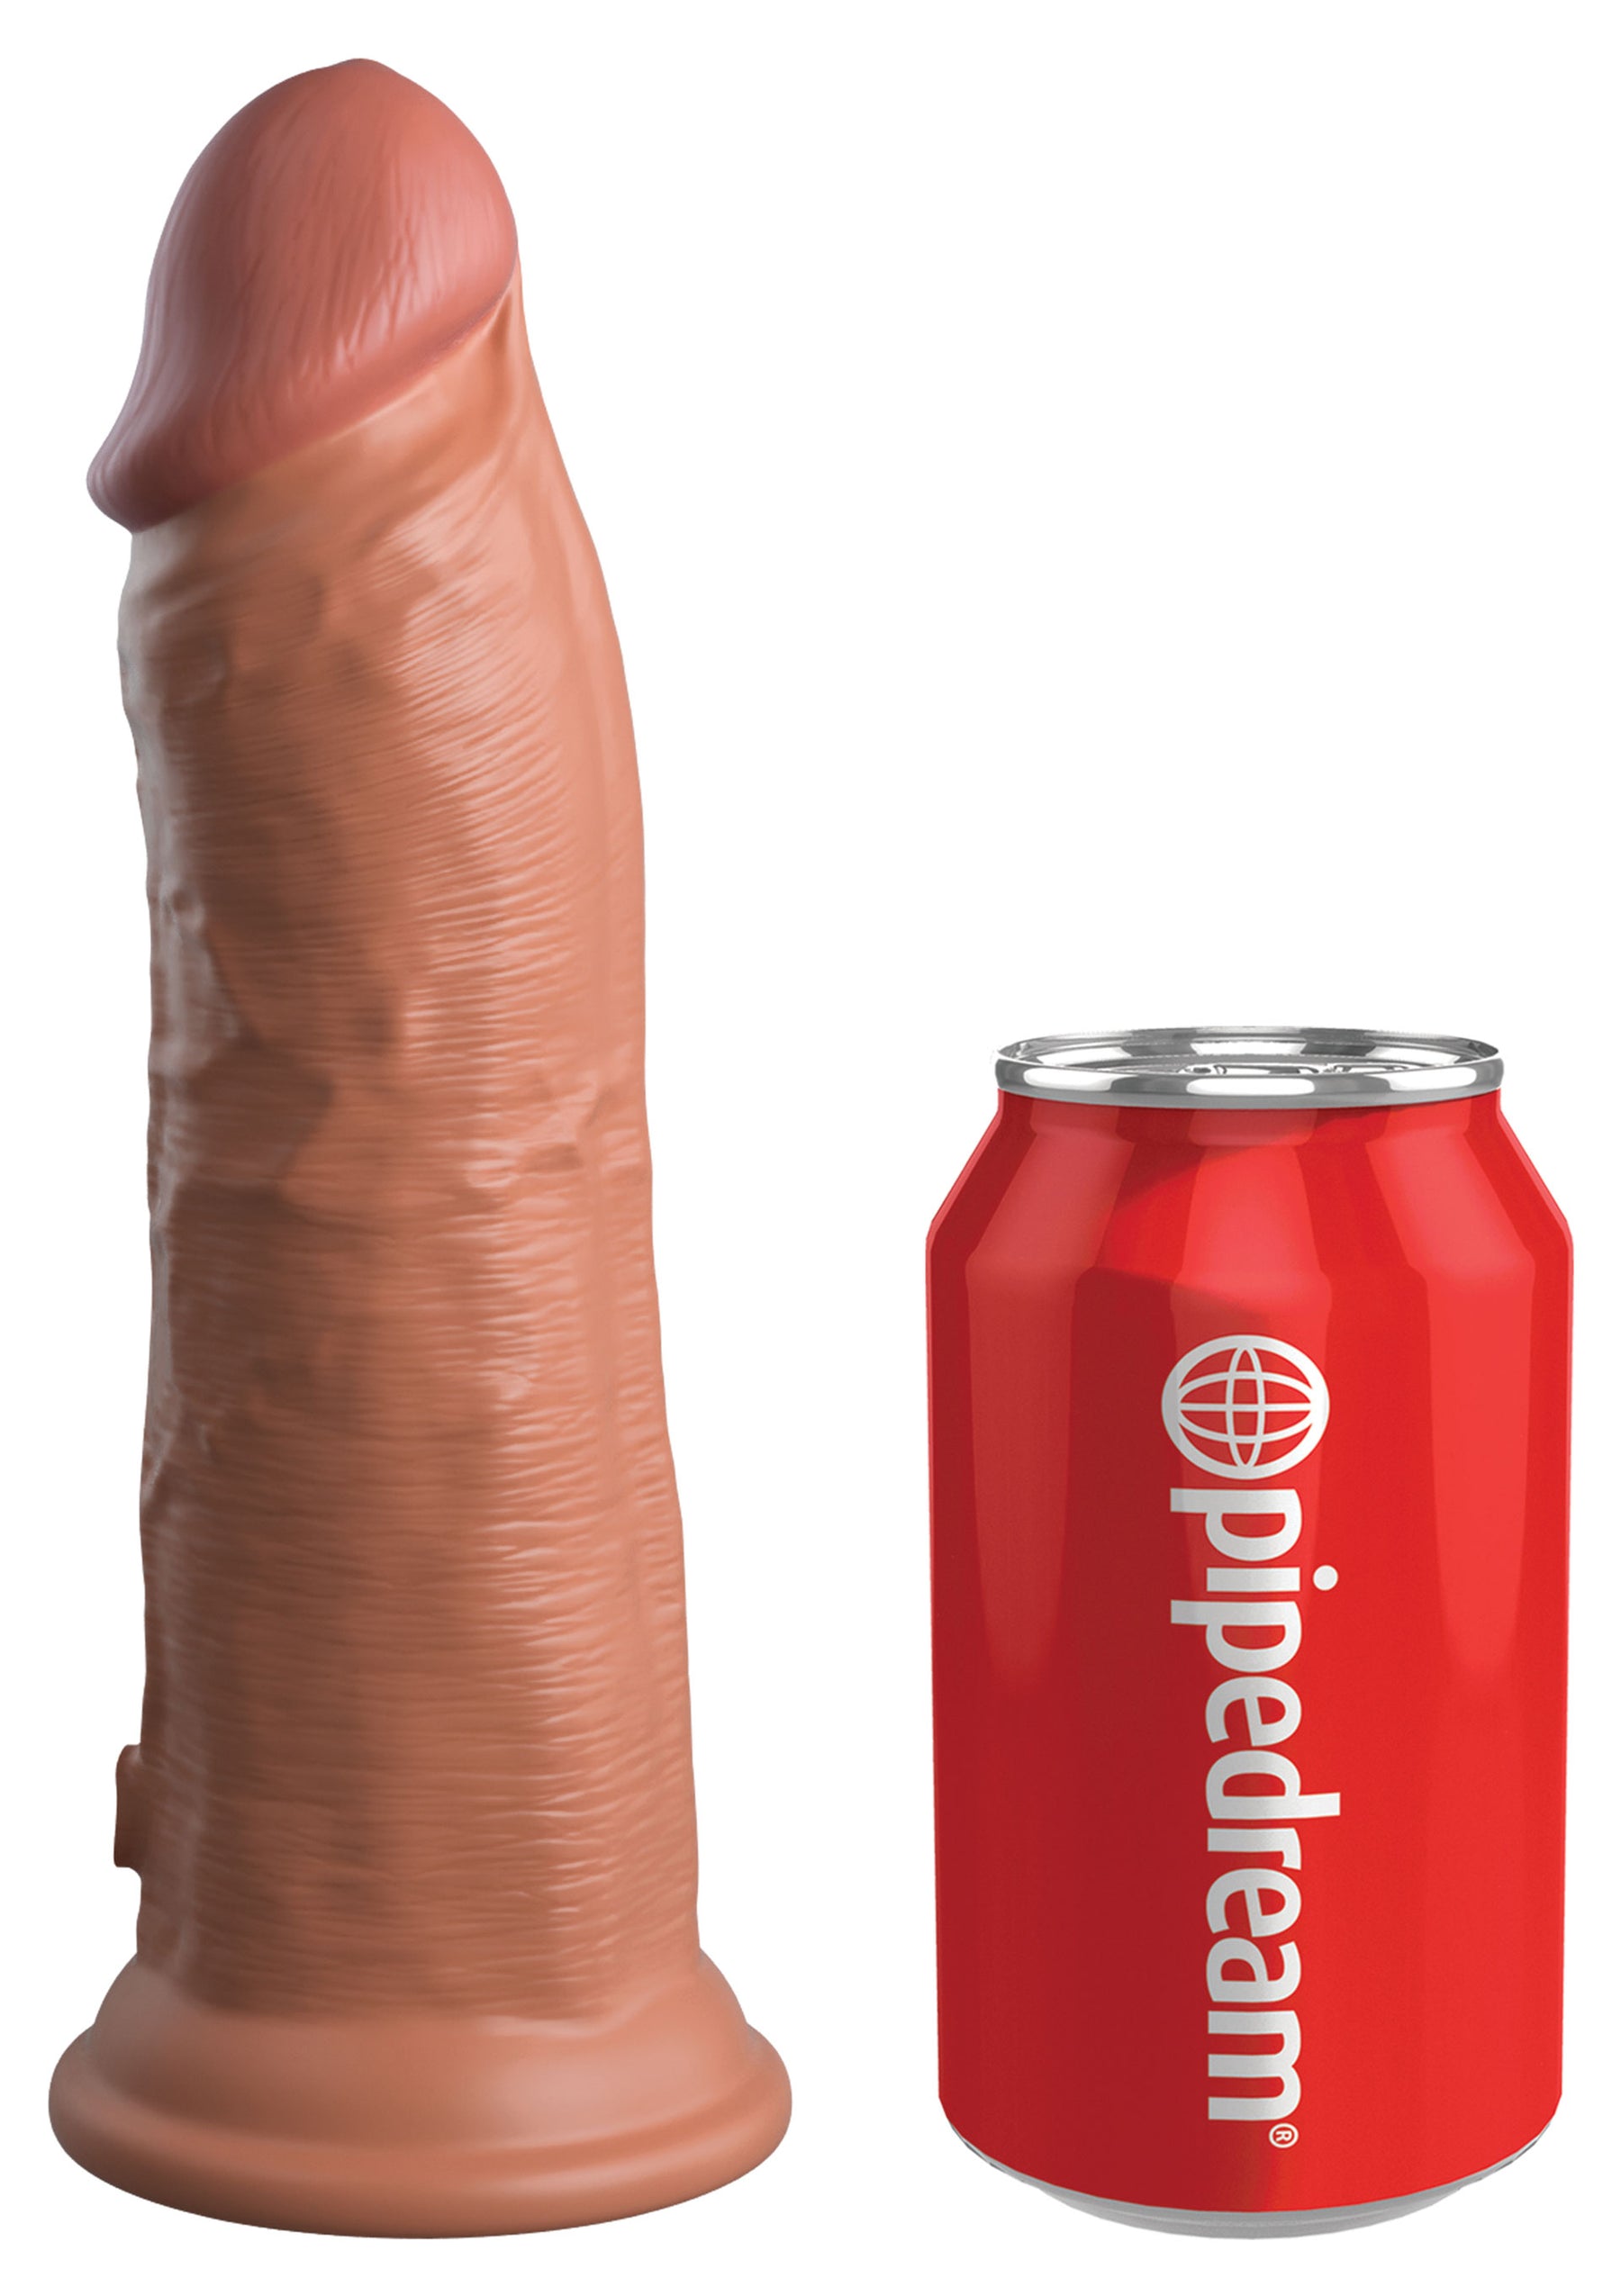 8 Inch 2Density Silicone Cock